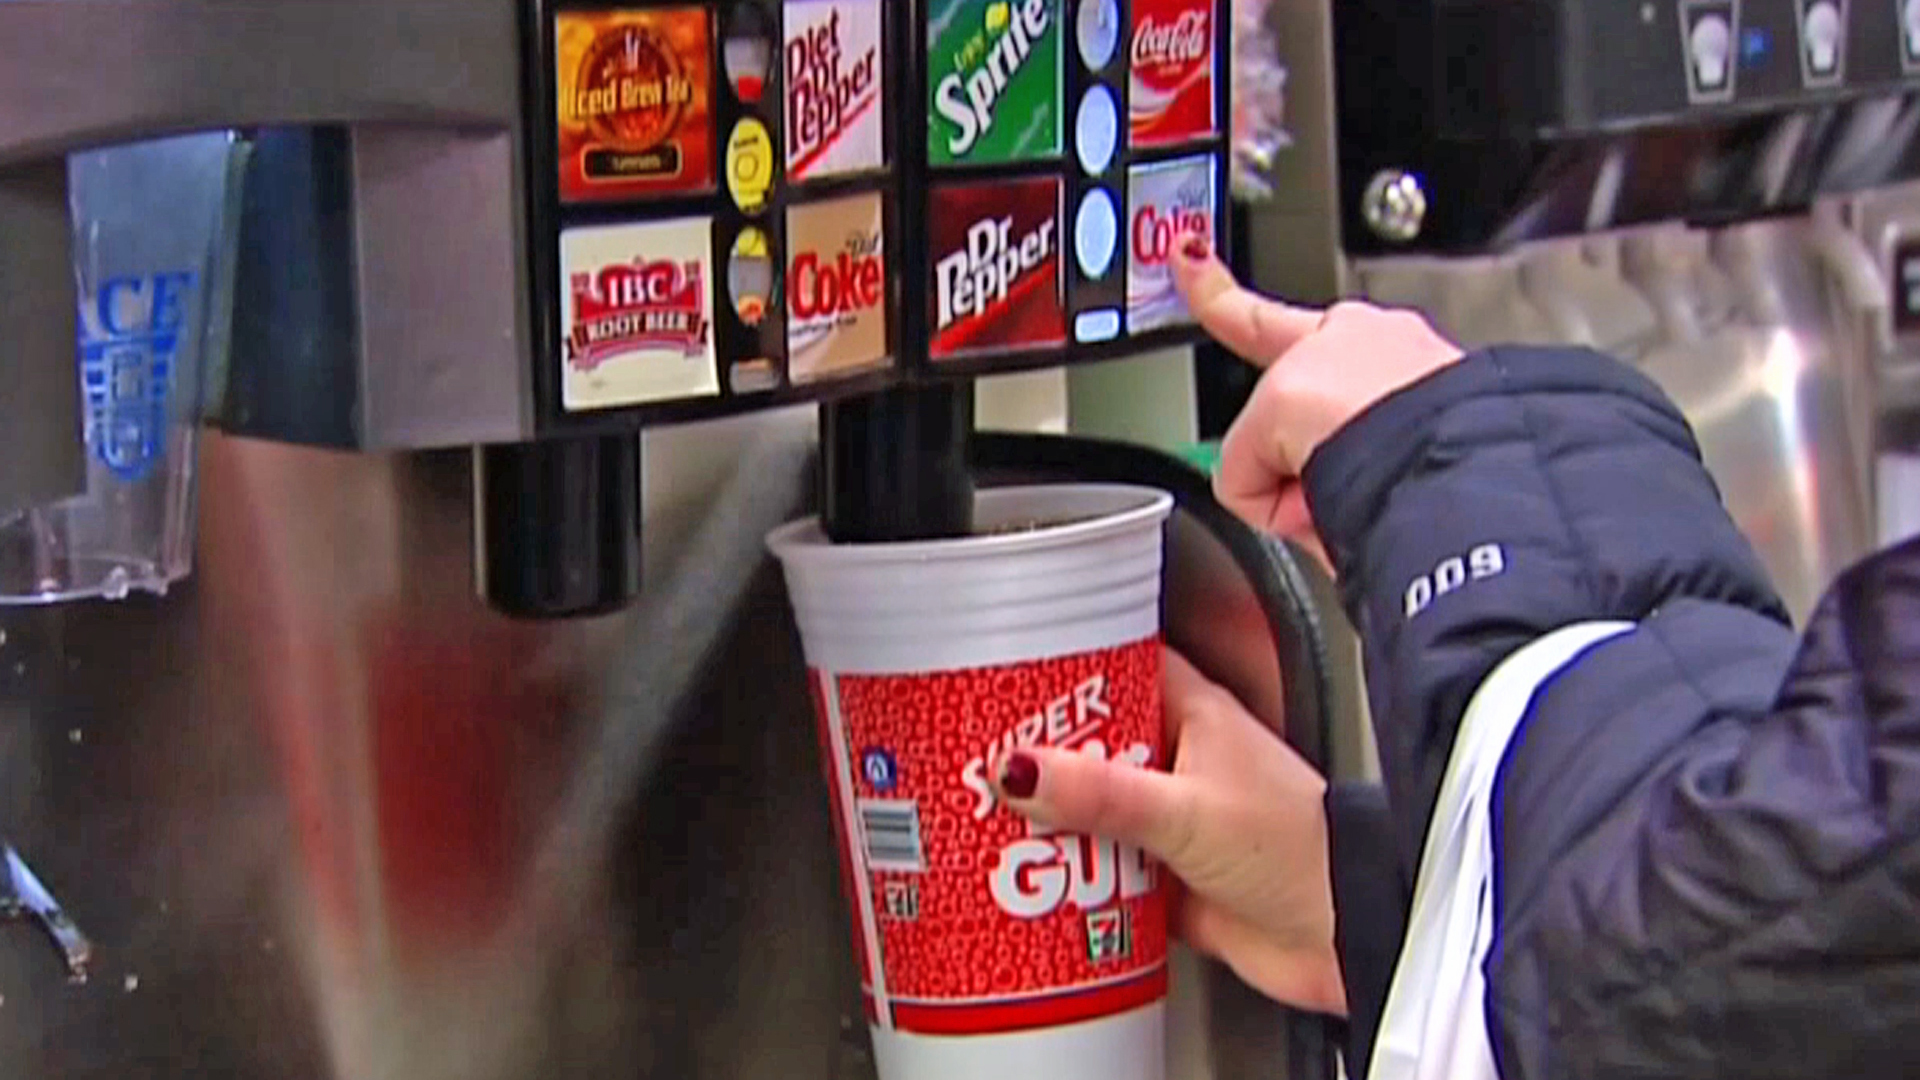 Bloomberg’s ban on big sodas is unconstitutional: appeals court